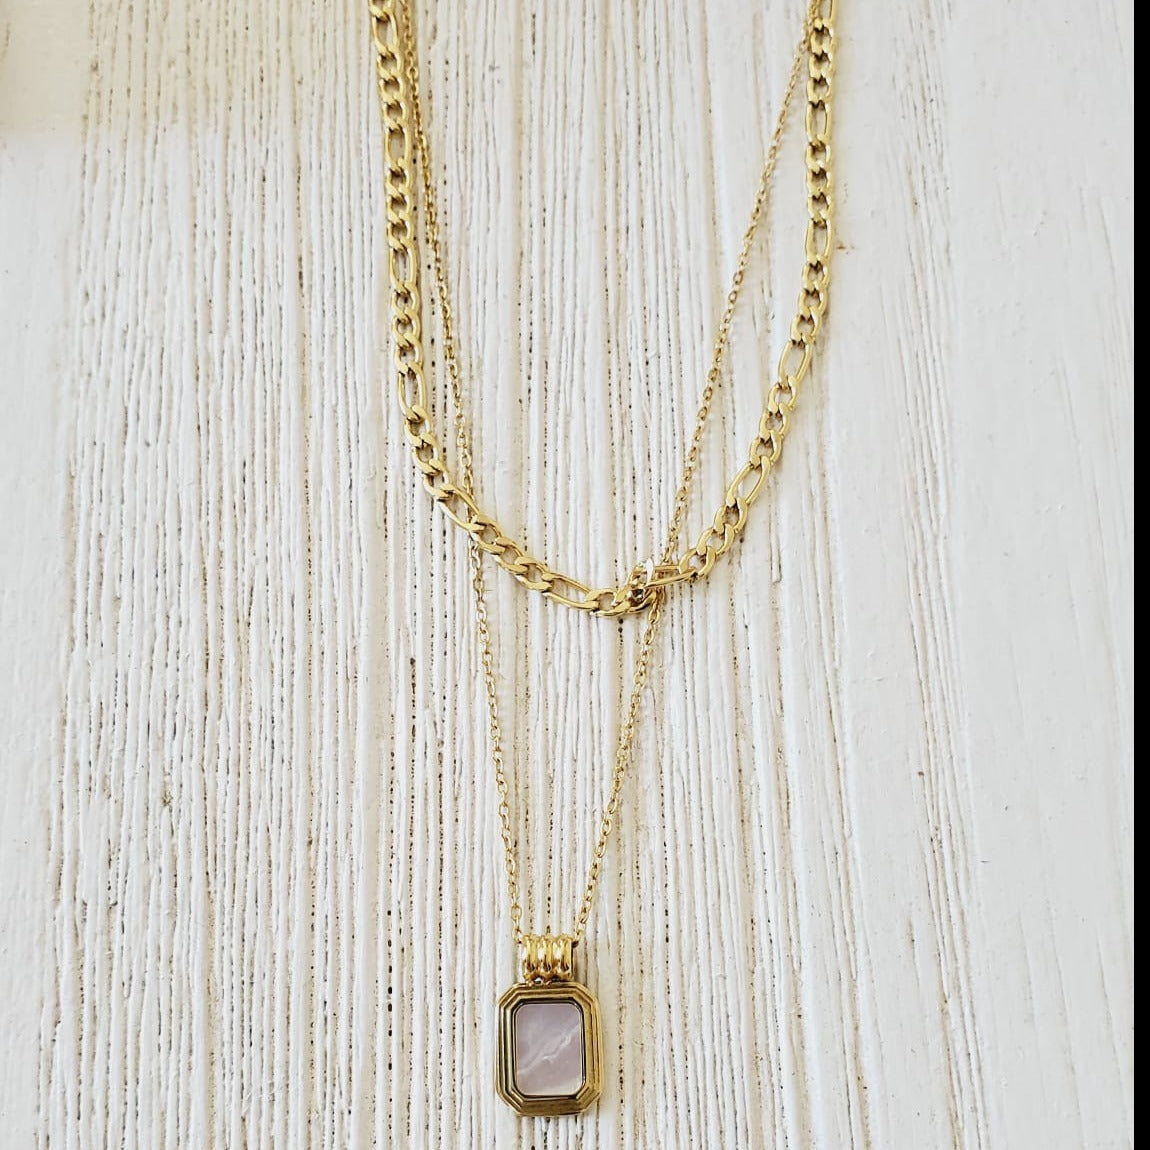 Minimalist chain, Gold filled Chain, Flat Gold Necklace, Snake Chain, Water resistant jewelry, water resistant Necklace, Water resistant bracelet, vintage jewelry, vintage jewelry, vintage necklace, 14k gold necklace, 14k gold jewelry, 14k gold necklace, fine jewelry, fine necklace, fine bracelet, snake gold necklace, bold necklace, bold jewelry, handmade jewelry, fine jewelry brand, white necklace, mother pearl necklace, white nacar necklace, hey harper jewelry, ellie vail jewelry,  hello luxy